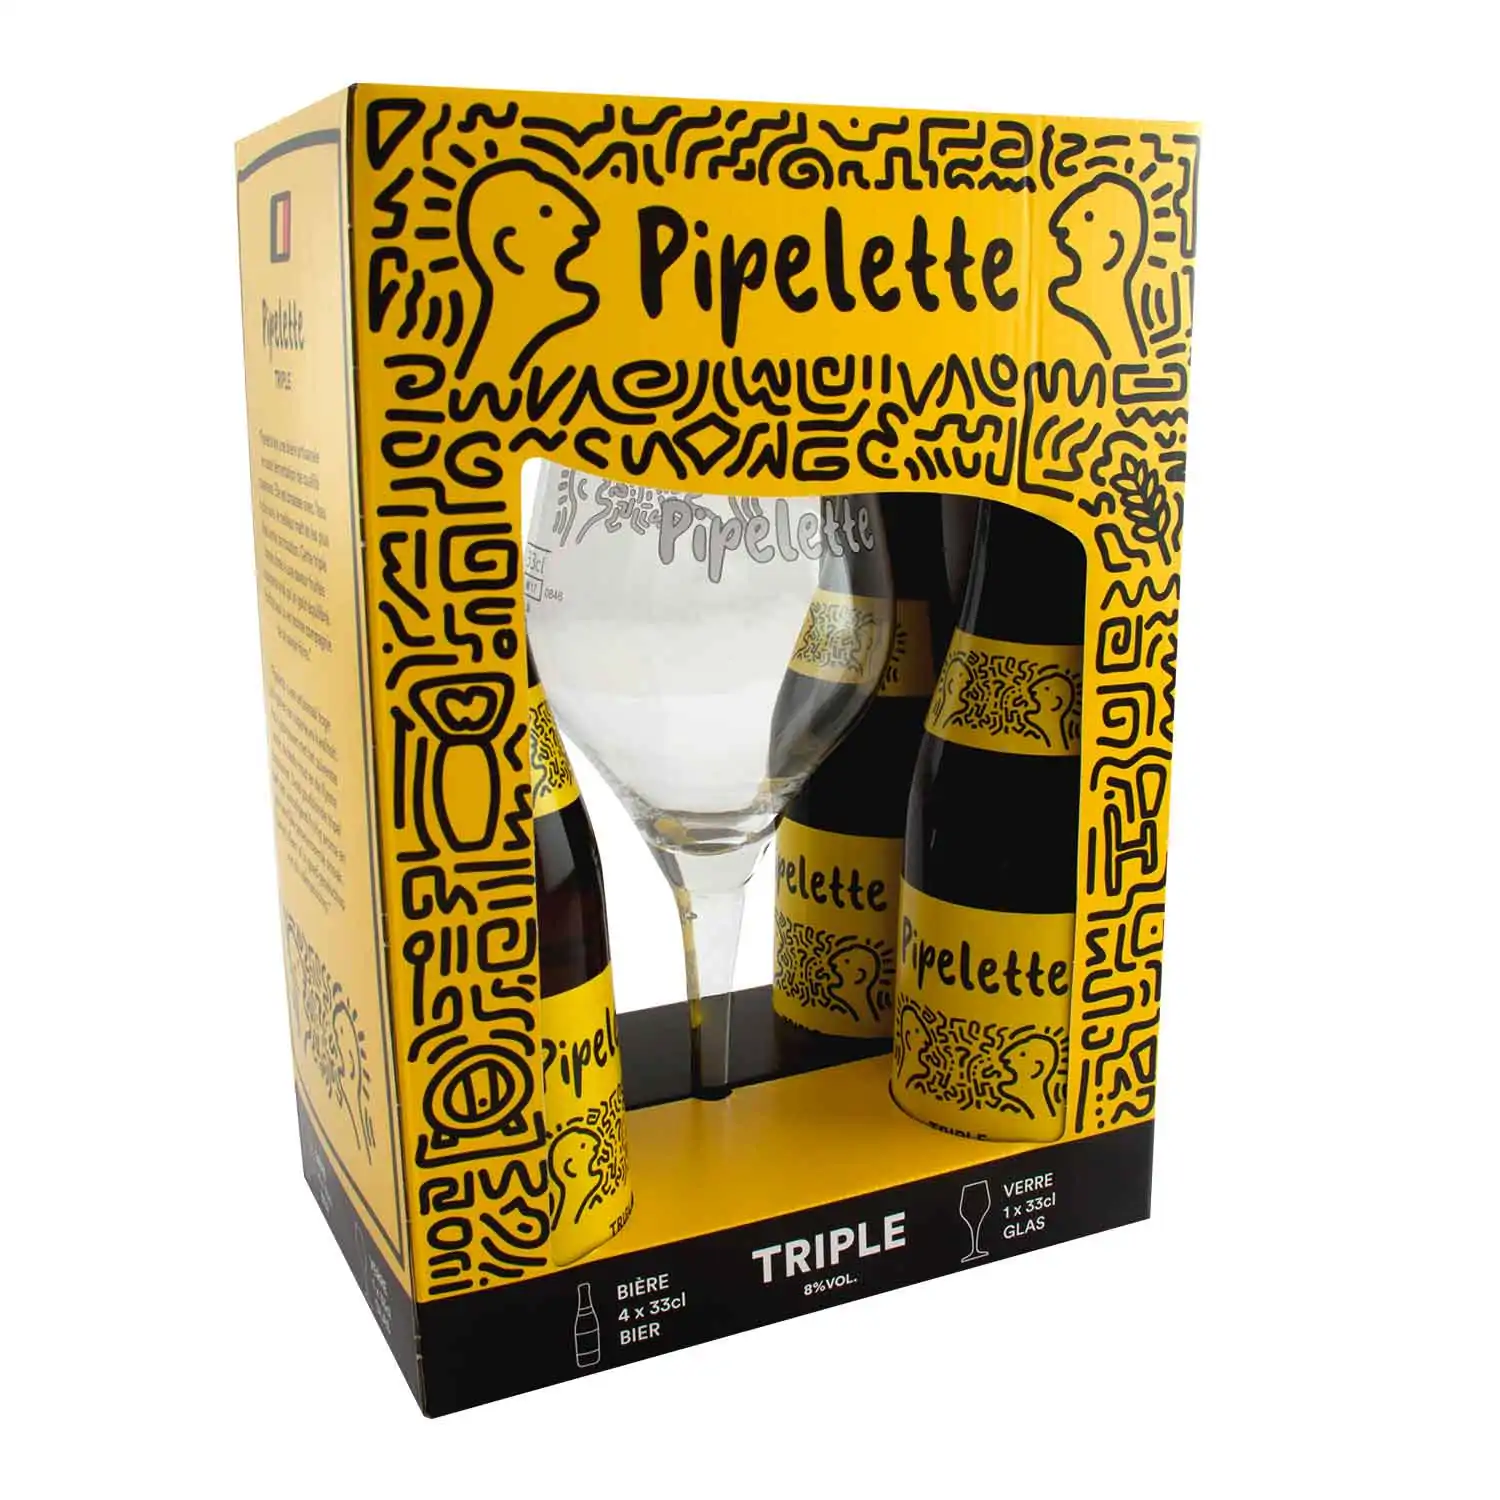 Pipelette triple 4x33cl+glass - Buy at Real Tobacco